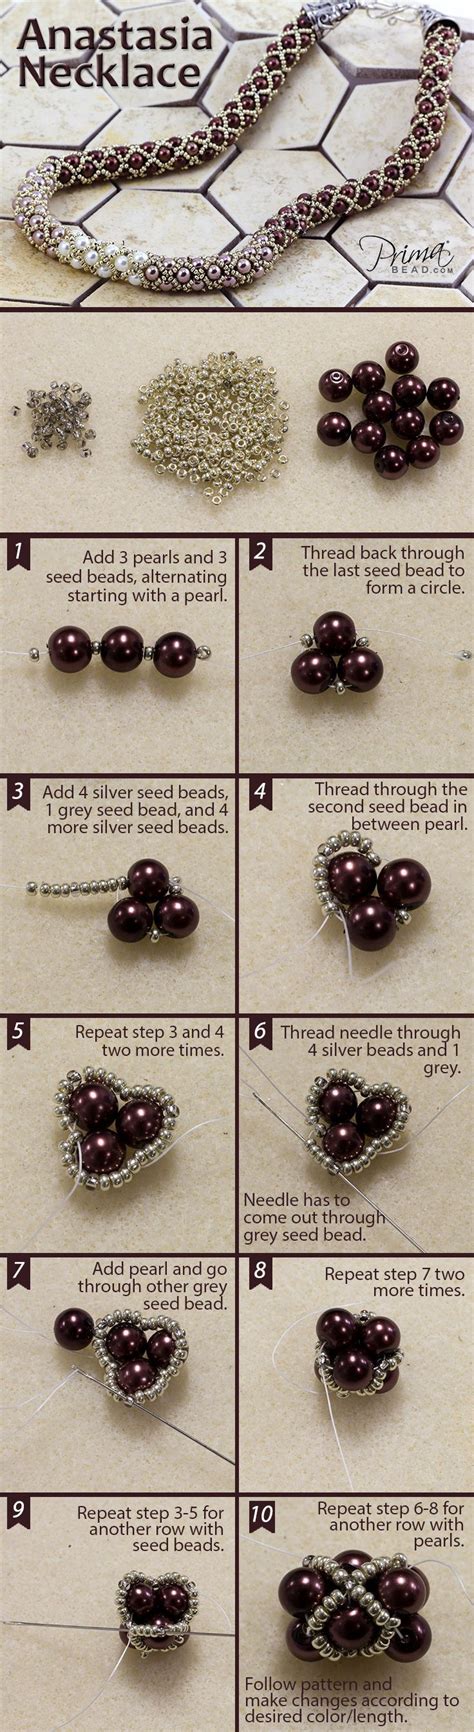 Best Seed Bead Jewelry 2017 Master Tubular Netting Technique Seed Bead